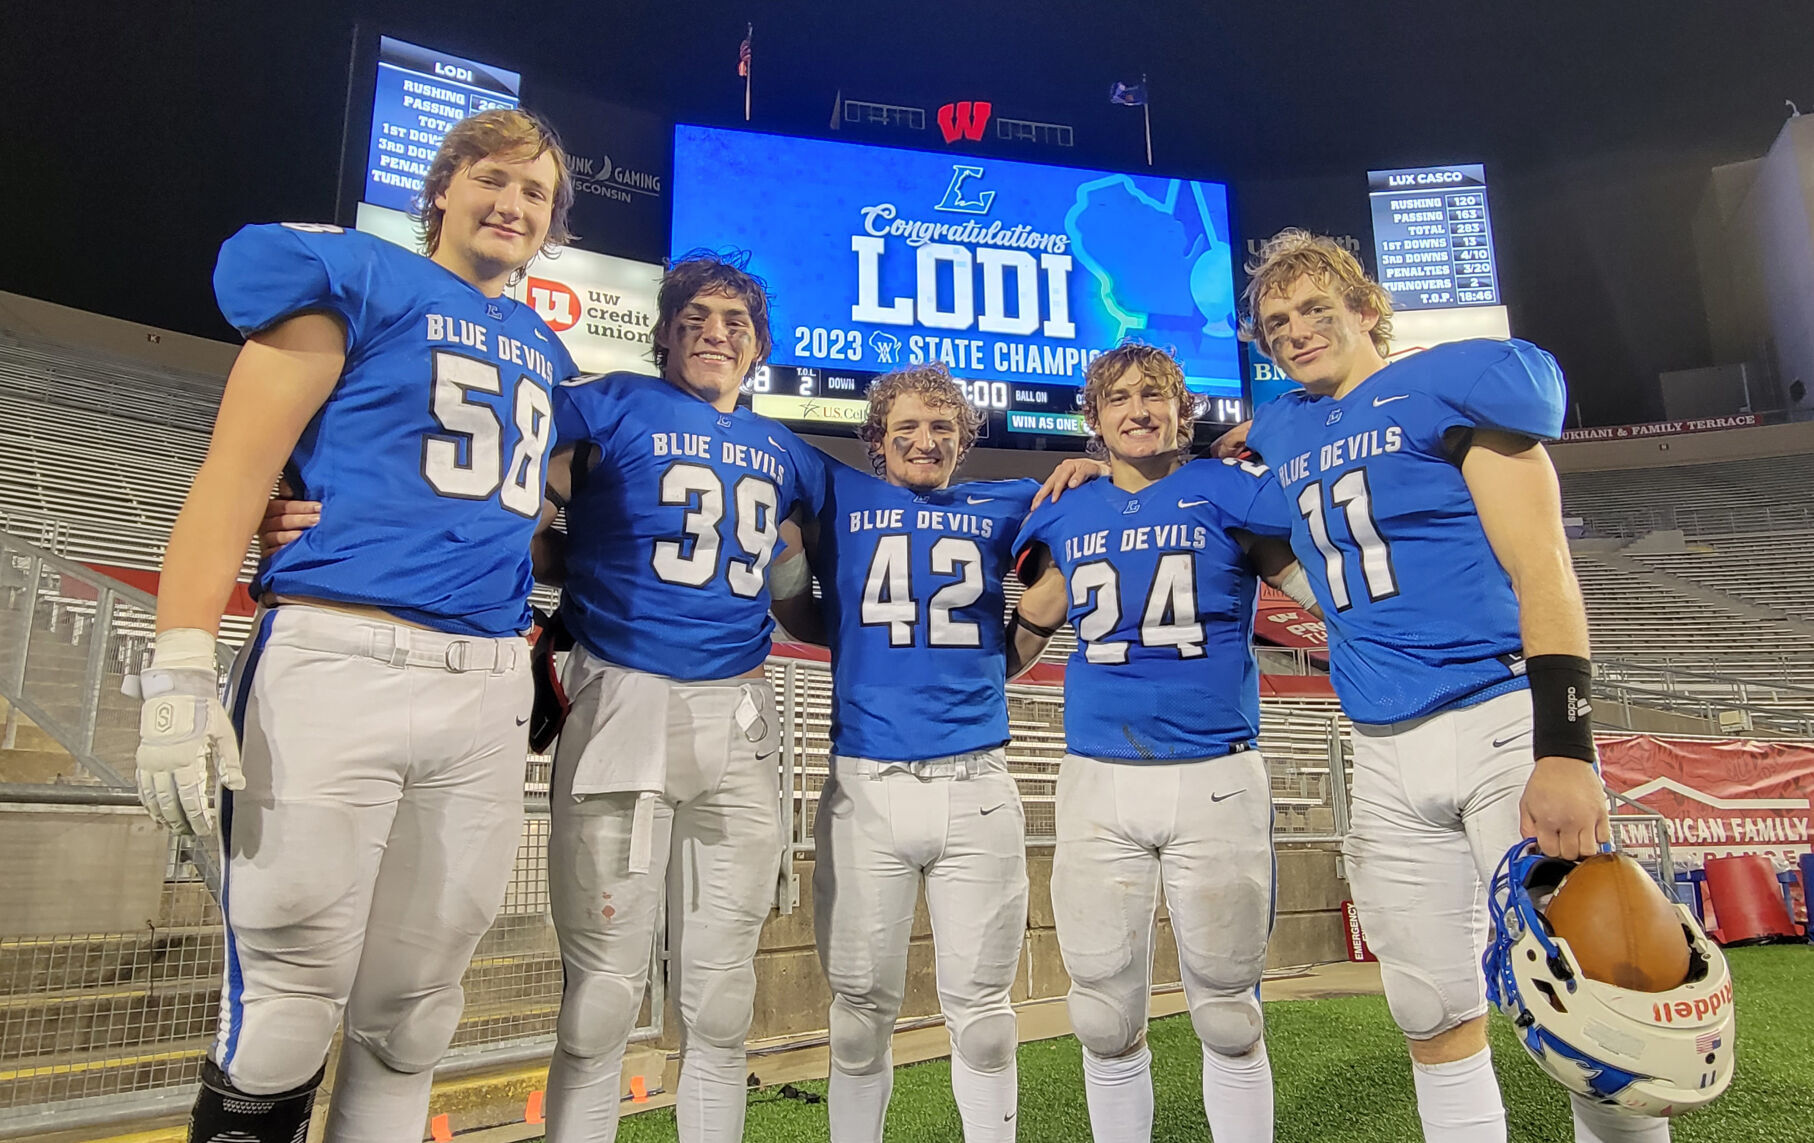 Lodi Football Team Secures Second State Championship with 38-14 Victory